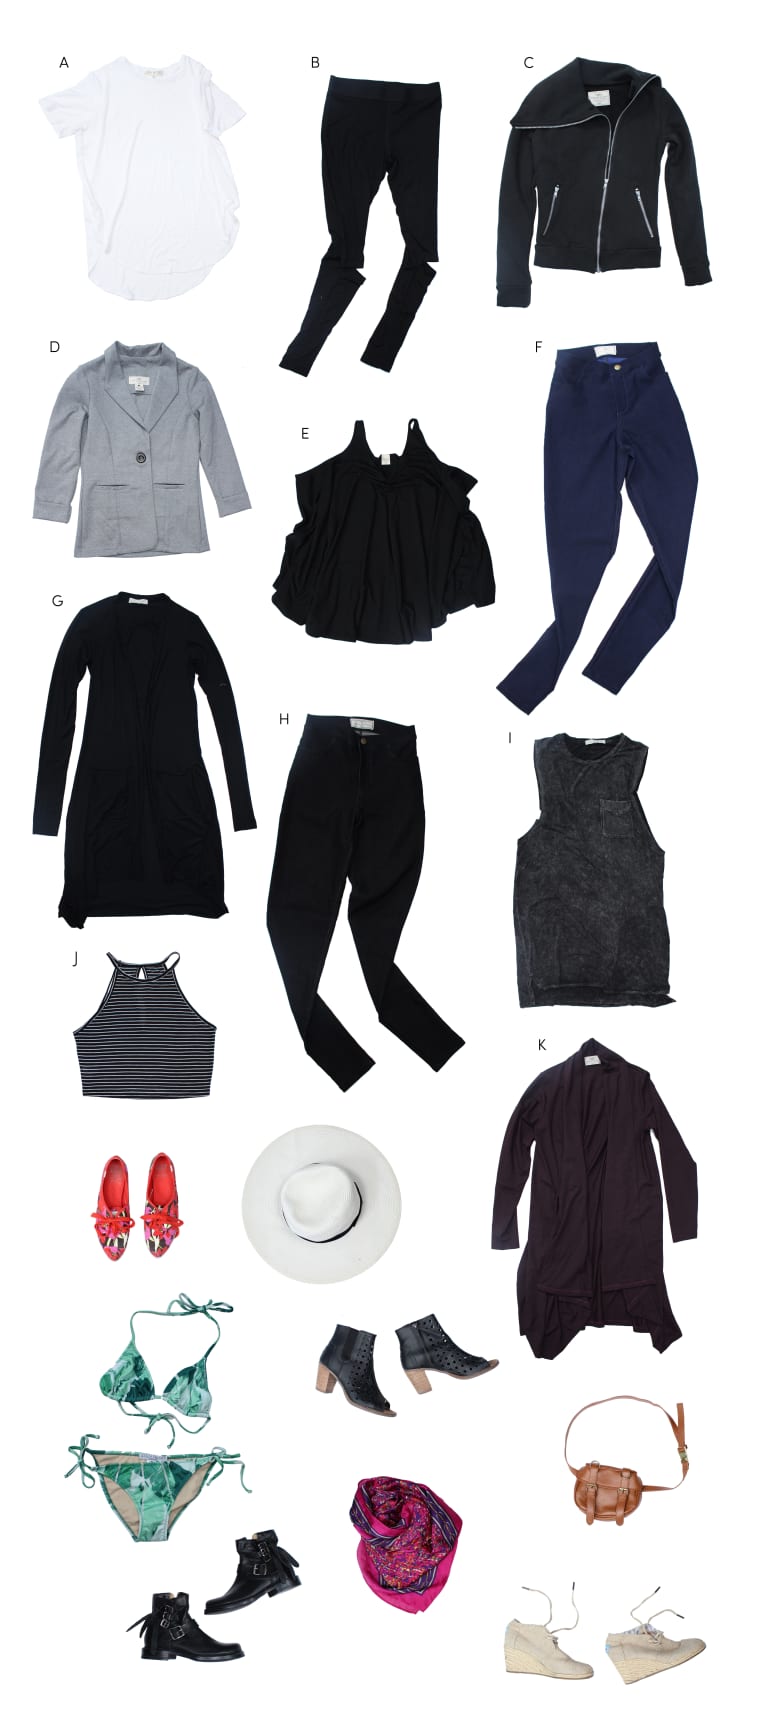 Capsule Wardrobes: How To Give Your Closet A Minimalist Makeover